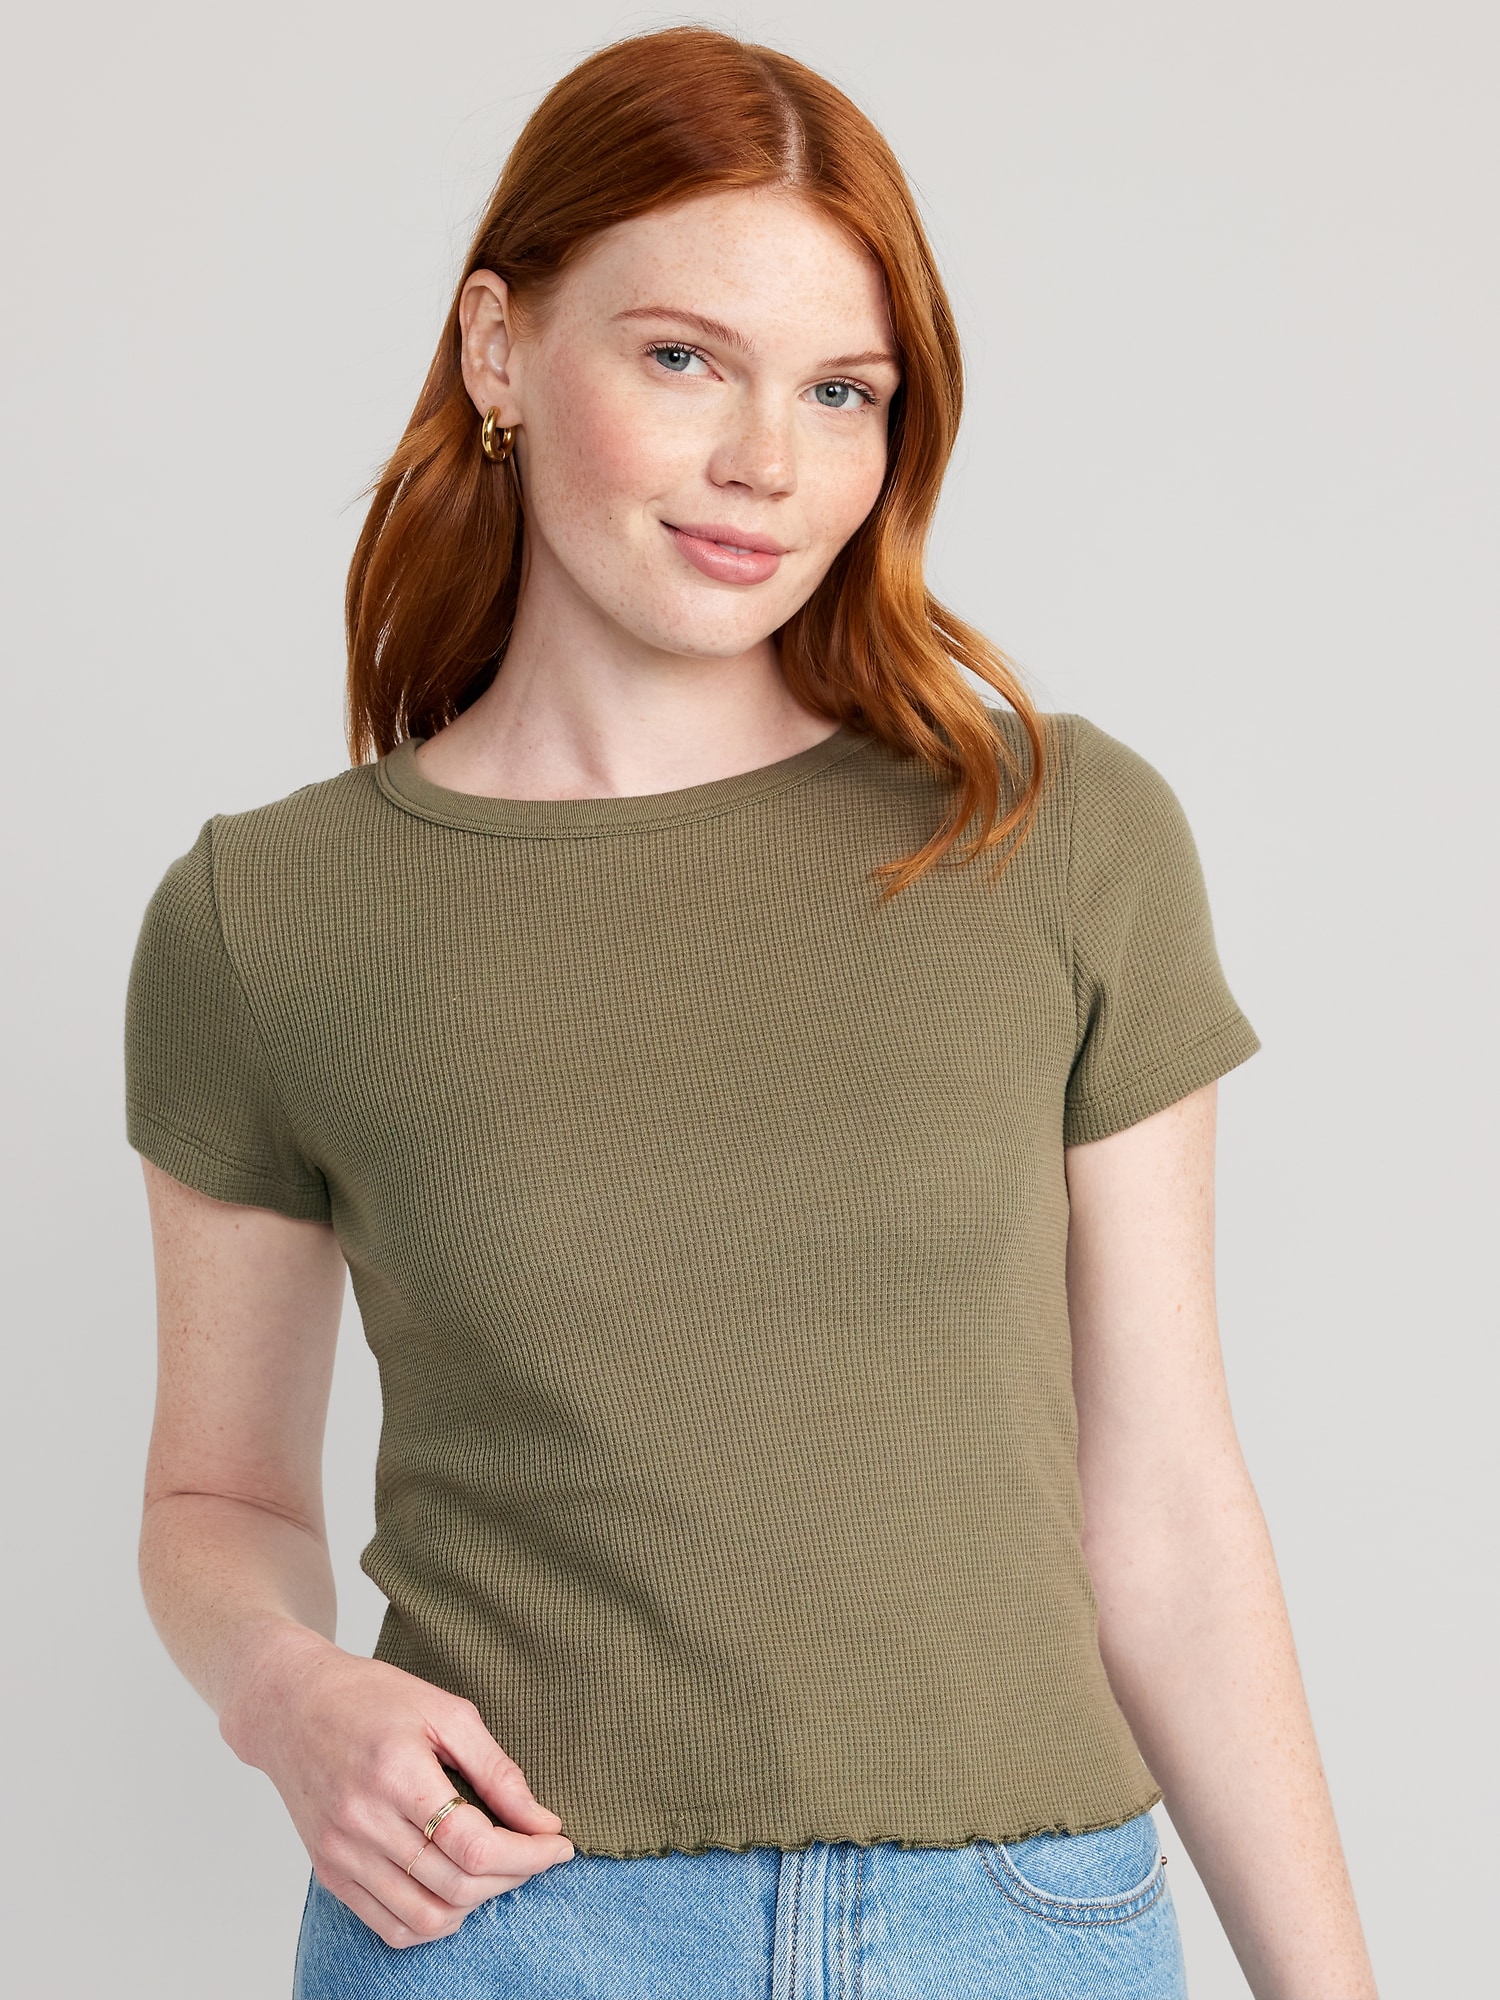 Lettuce-Edge Thermal-Knit Cropped T-Shirt